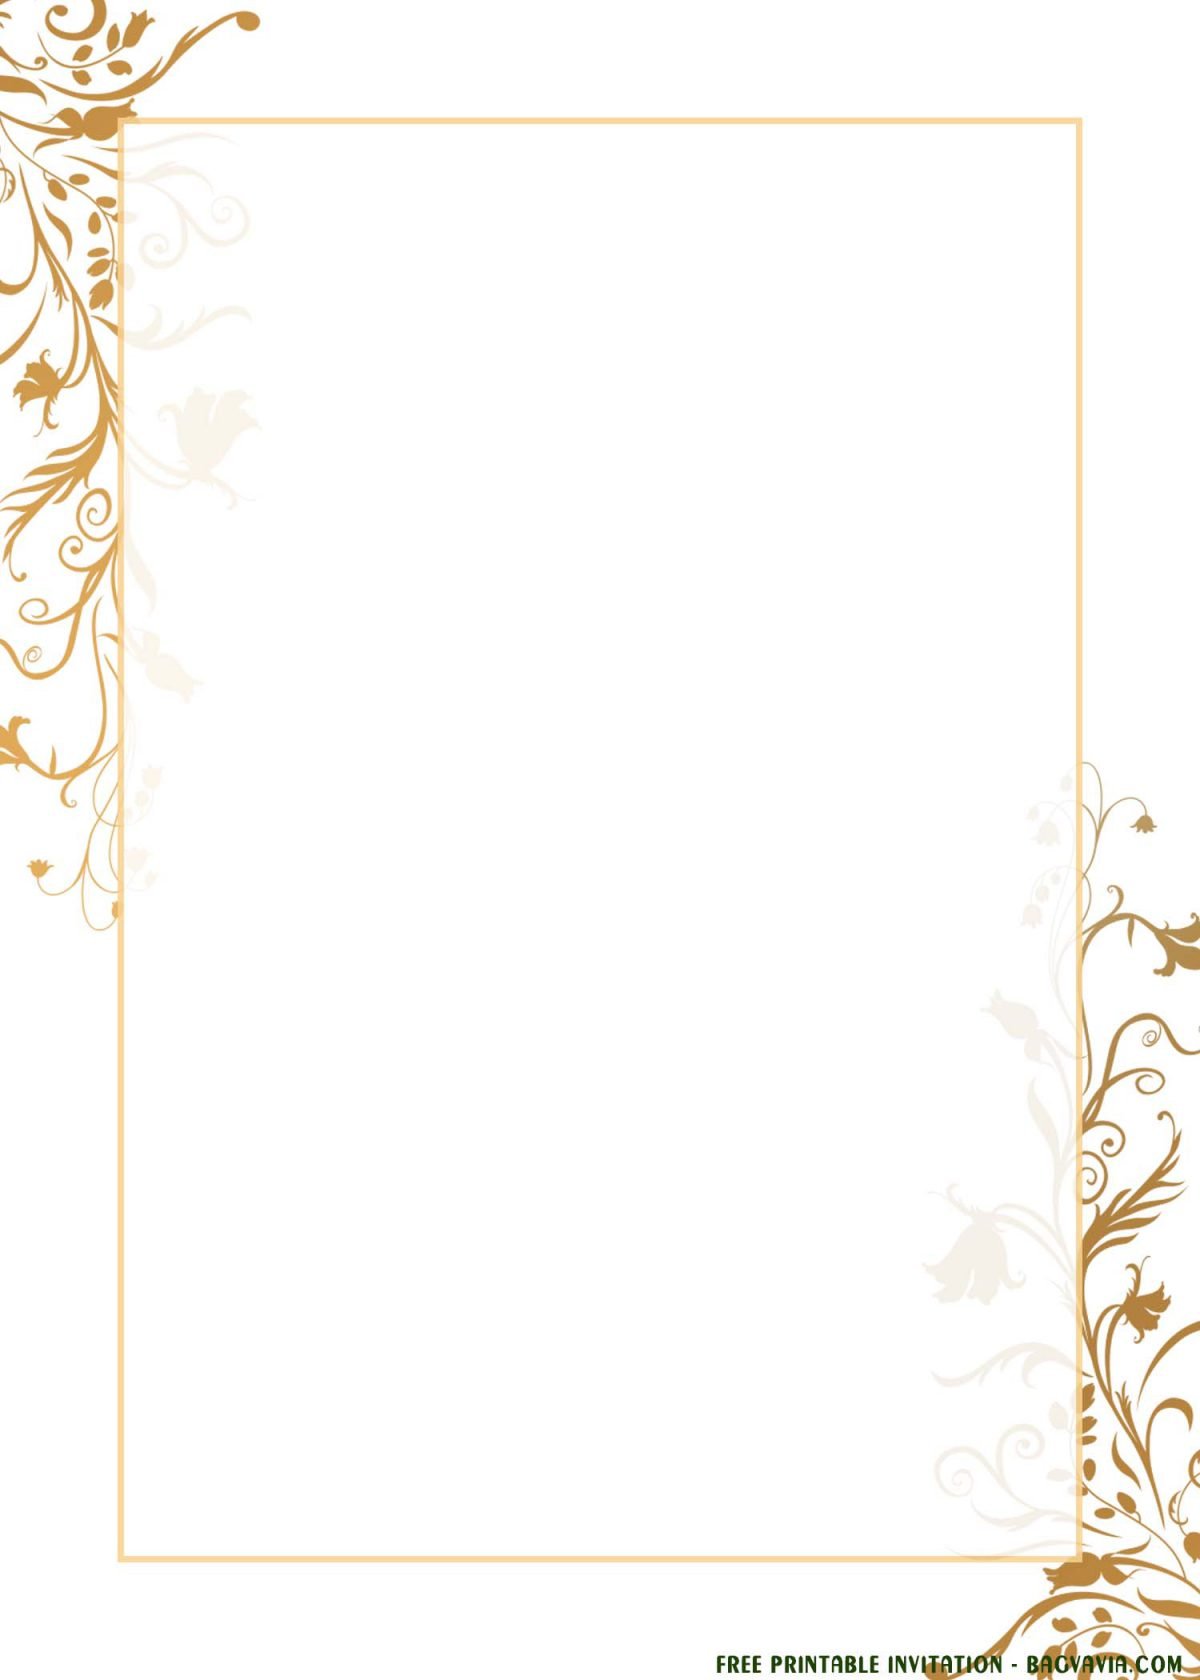 Free Printable Gold Lace Invitation Templates For Any Occasions With Rectangle Shaped Text Frame and Box